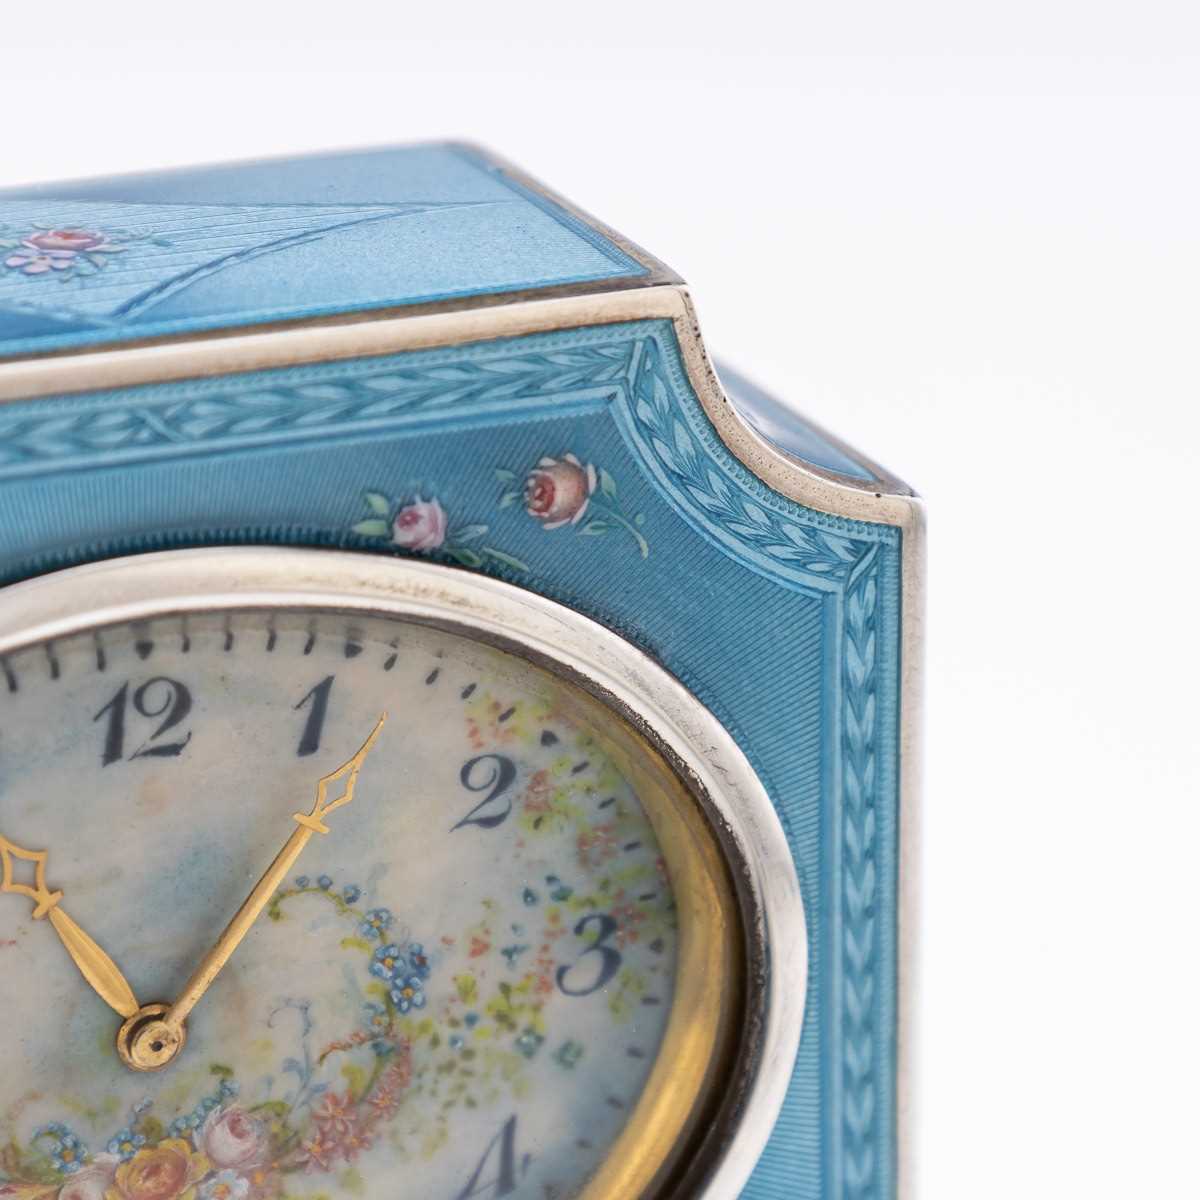 A FINE EARLY 20TH CENTURY SWISS SOLID SILVER AND GUILLOCHE ENAMEL TRAVEL CLOCK IN DISPLAY CASE - Image 10 of 62